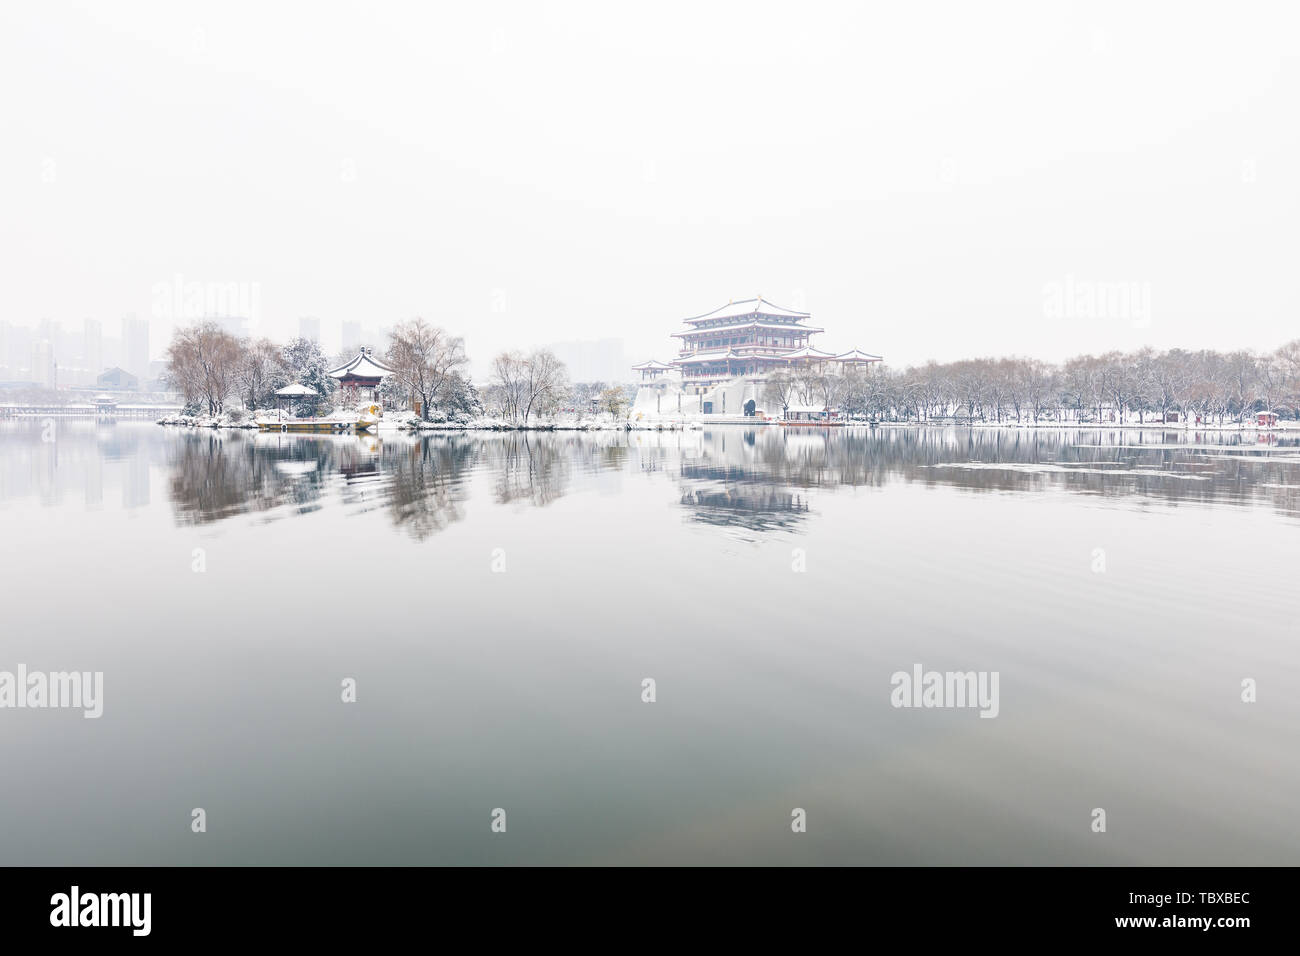 Ancienne ville Xi'an Qujiang Scenic Area Big Wild Goose Pagoda Rainbow Garden City South Lake Scenery Banque D'Images